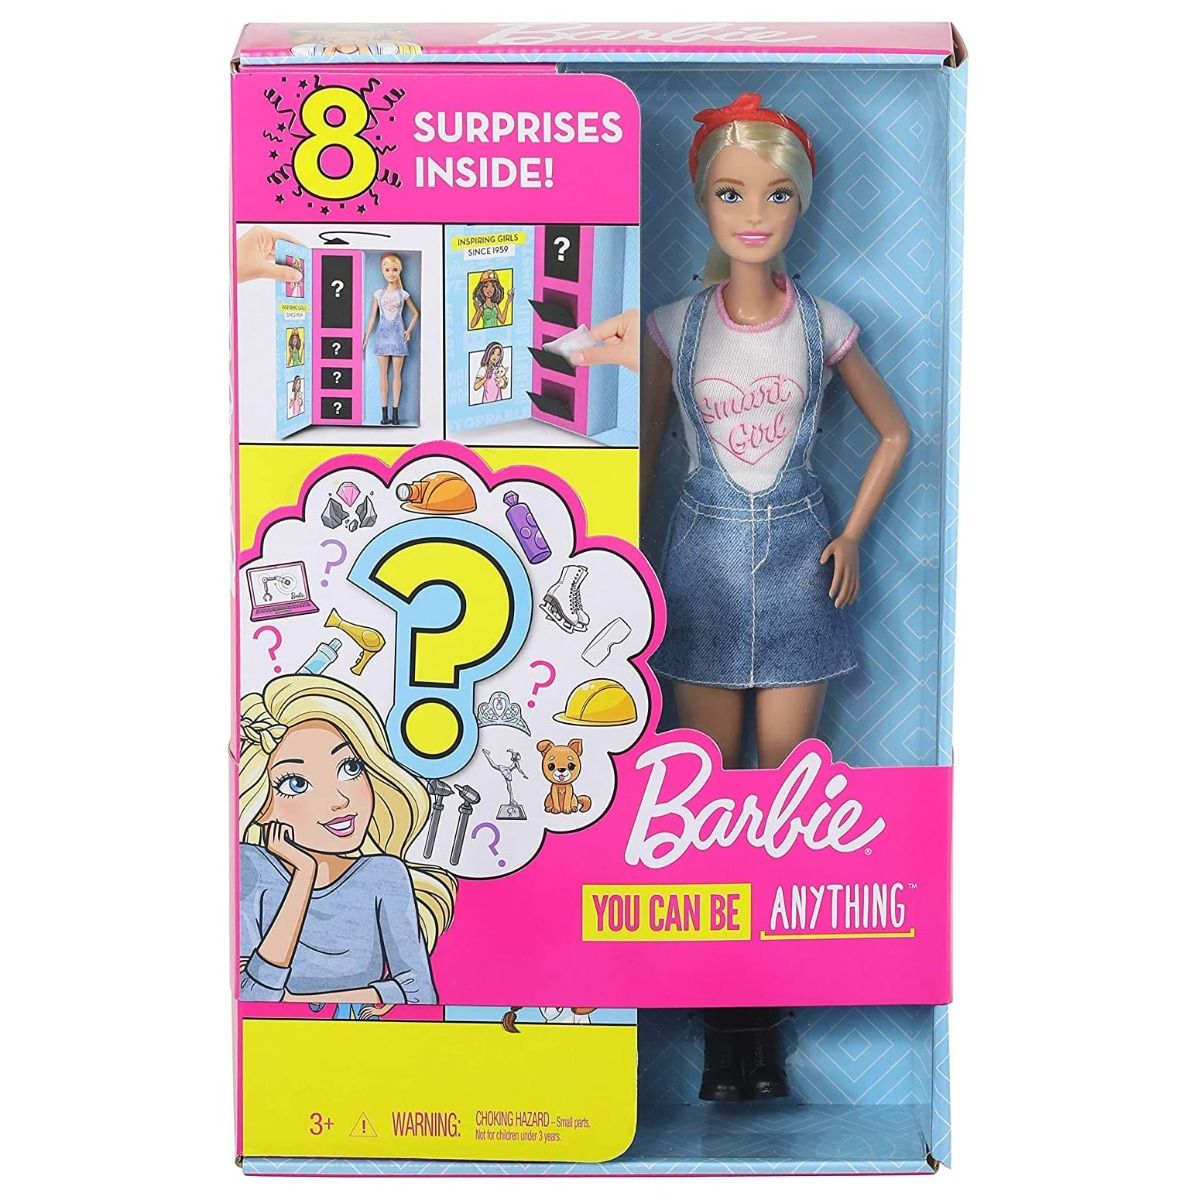 Pride curb Encouragement Papusa Barbie You can be - Cariera surpriza, 8 accesorii - eMAG.ro